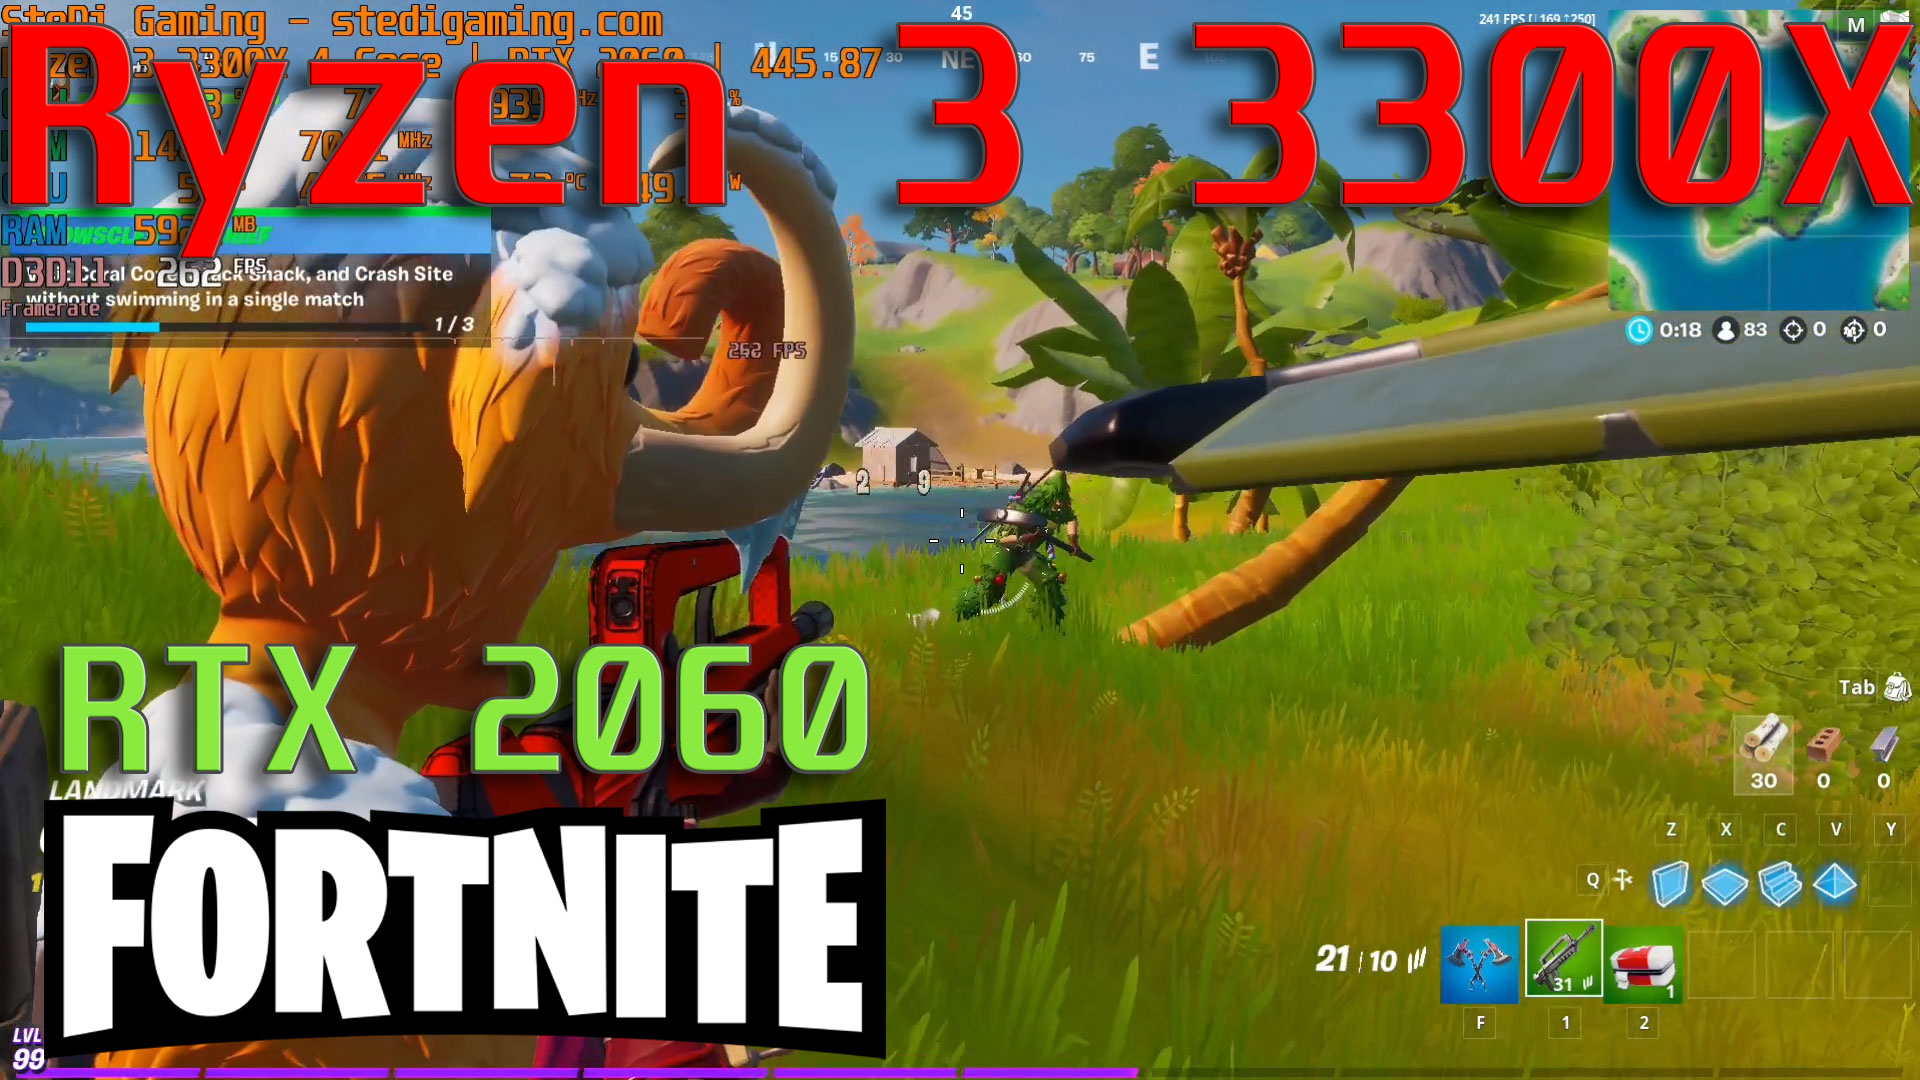 Ryzen 3 3300X Fortnite Competitive Gameplay Test With RTX 2060